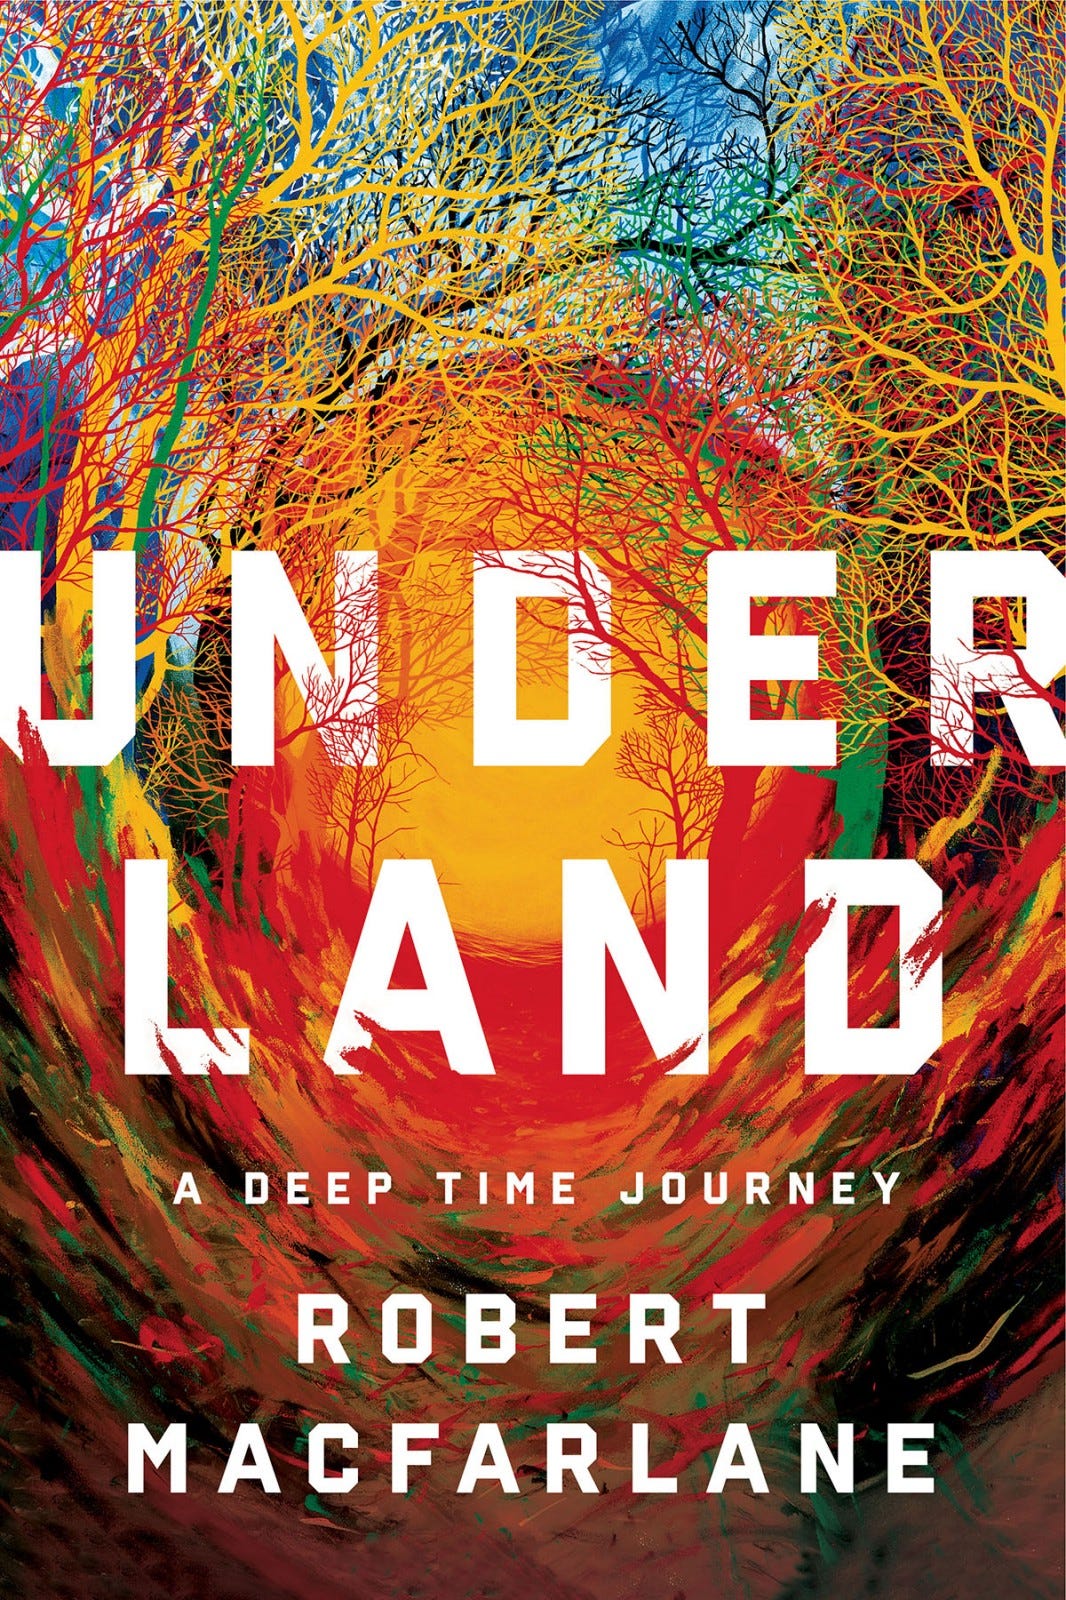 The cover of “Underland”